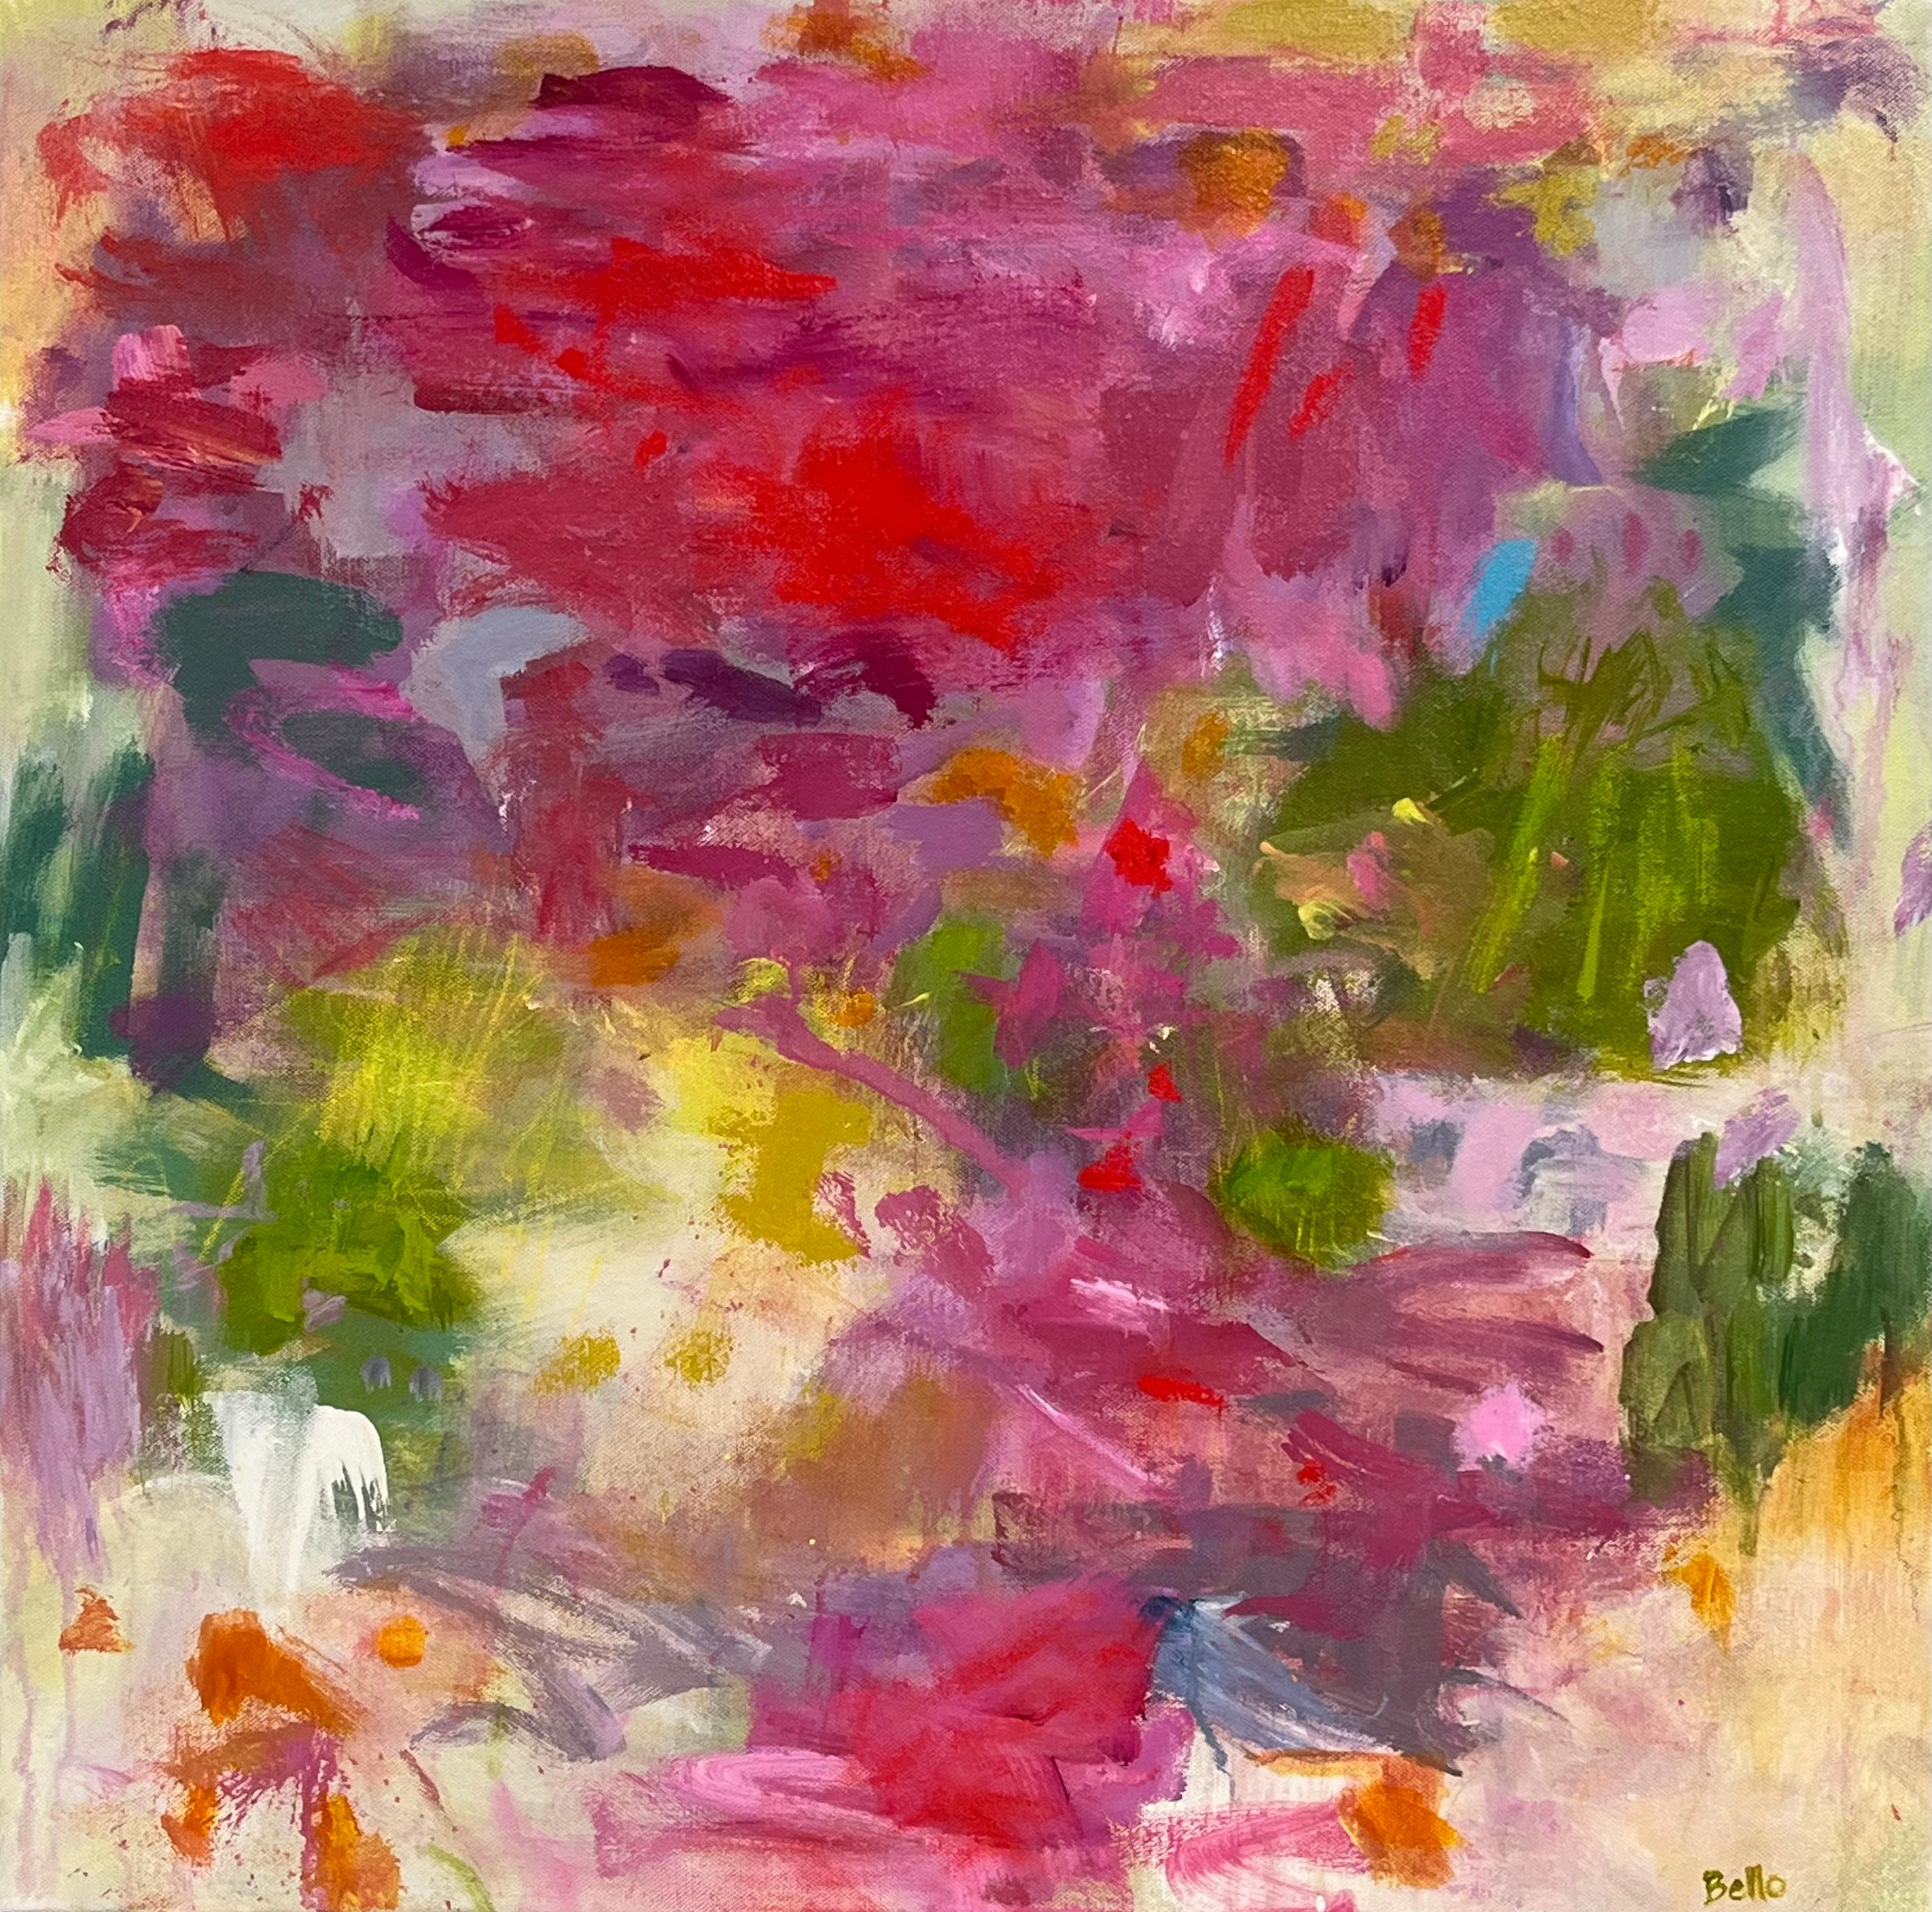 Katherine Bello Abstract Painting - Profusion (Abstract, Expressionist, Warm, Lush, Pink, Red, Green, ~37% OFF)